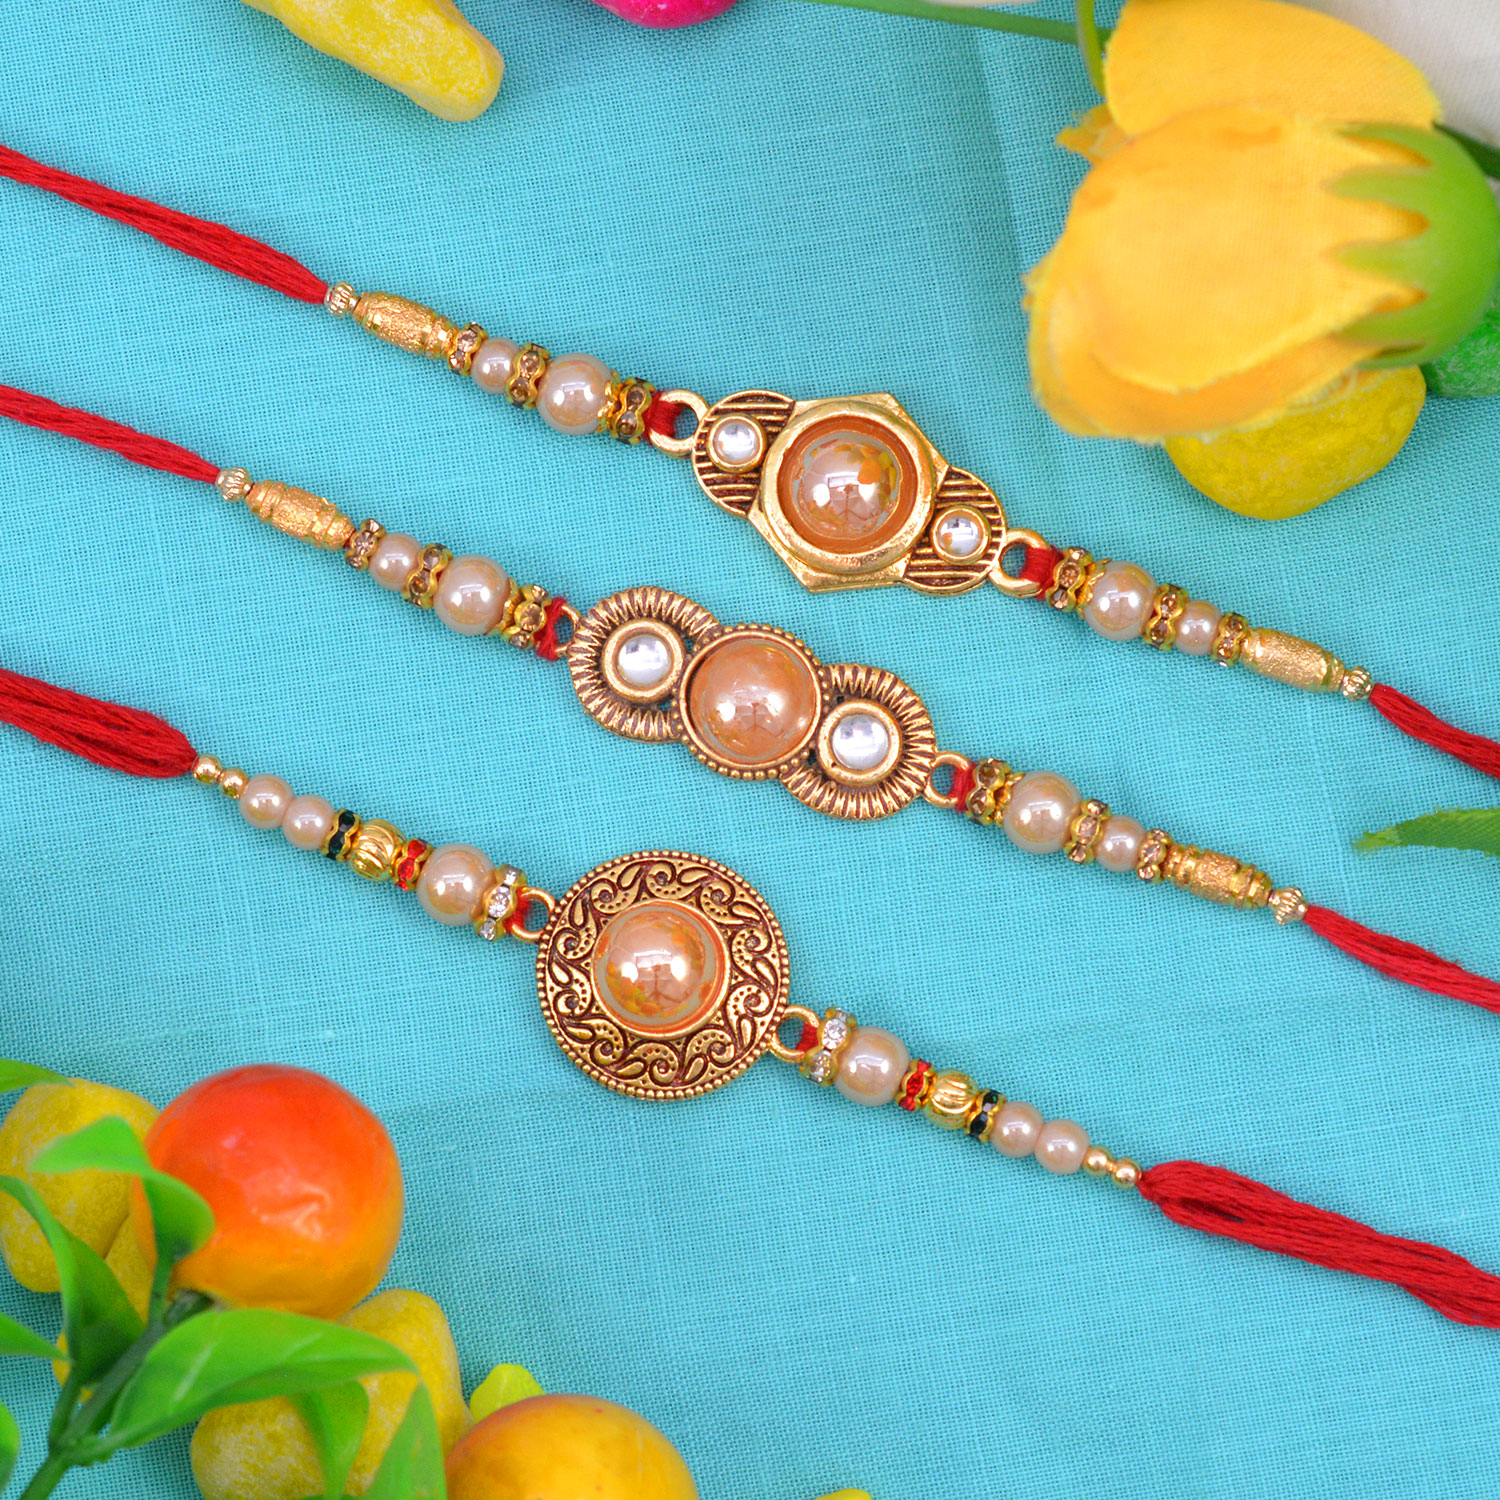 Eye Catching Nicely Work handcrafted Pear Rakhi Set of 3 Rakhis for Brother